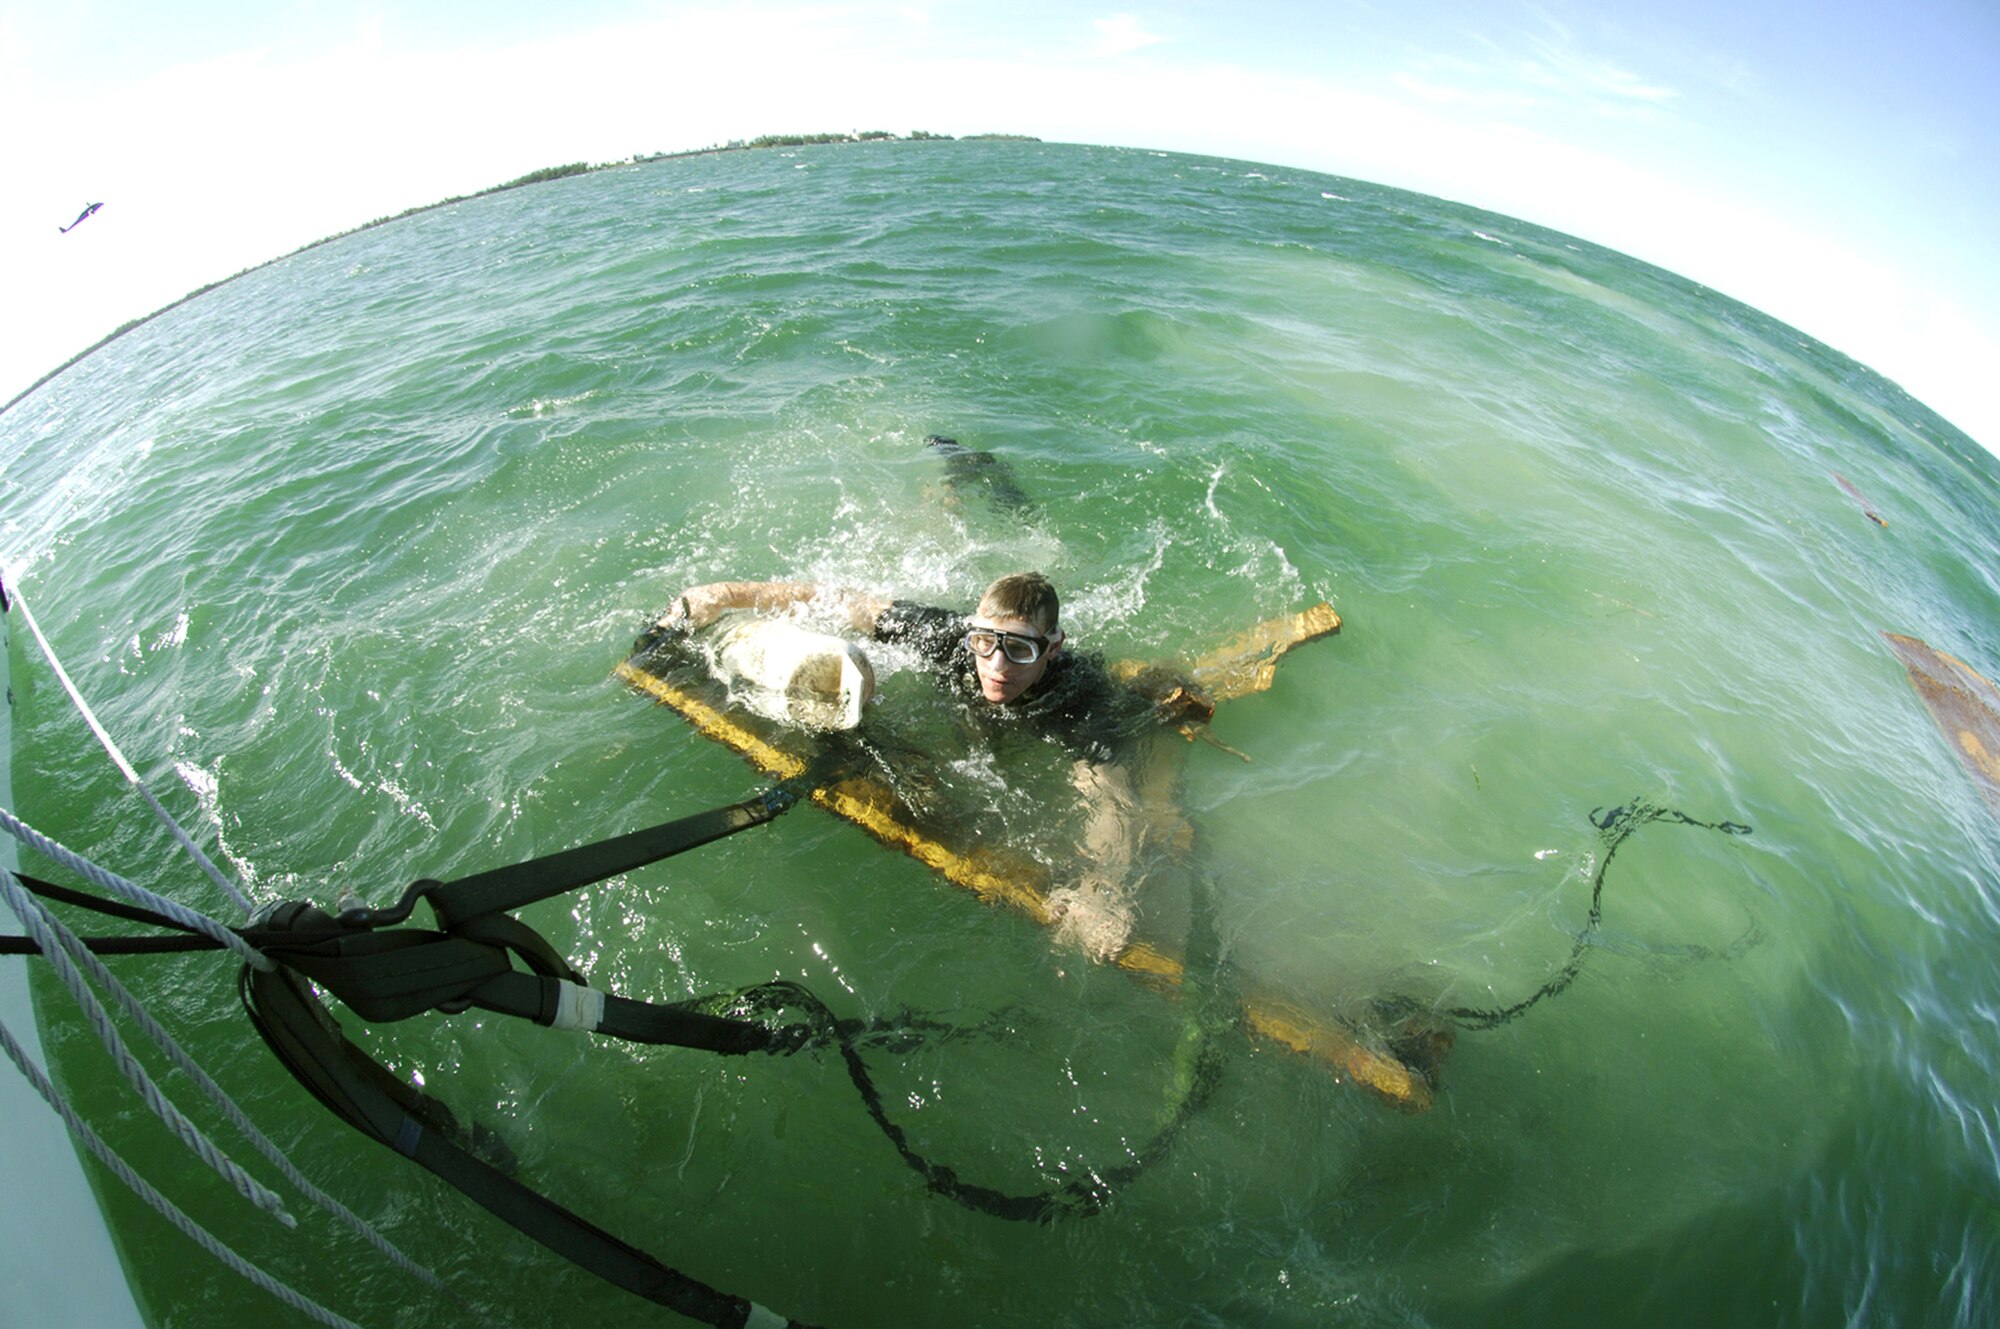 Staff Sgt. William Lawson, 38th Rescue Squaron pararescueman, gains control of a protective sled used in the airdrop of the Hard Duck off the coast of Key West, Fla. An H-Duck is a fully-inflated zodiac raft that is dropped out of an HC-130 and can help PJ’s save valuable time during rescue efforts in the water. The 71st and 38th Rescue Squadrons also combined efforts to test the advanced rescue craft process, which involved deploying a personal watercraft. (U.S. Air Force photo Senior Airman Javier Cruz)